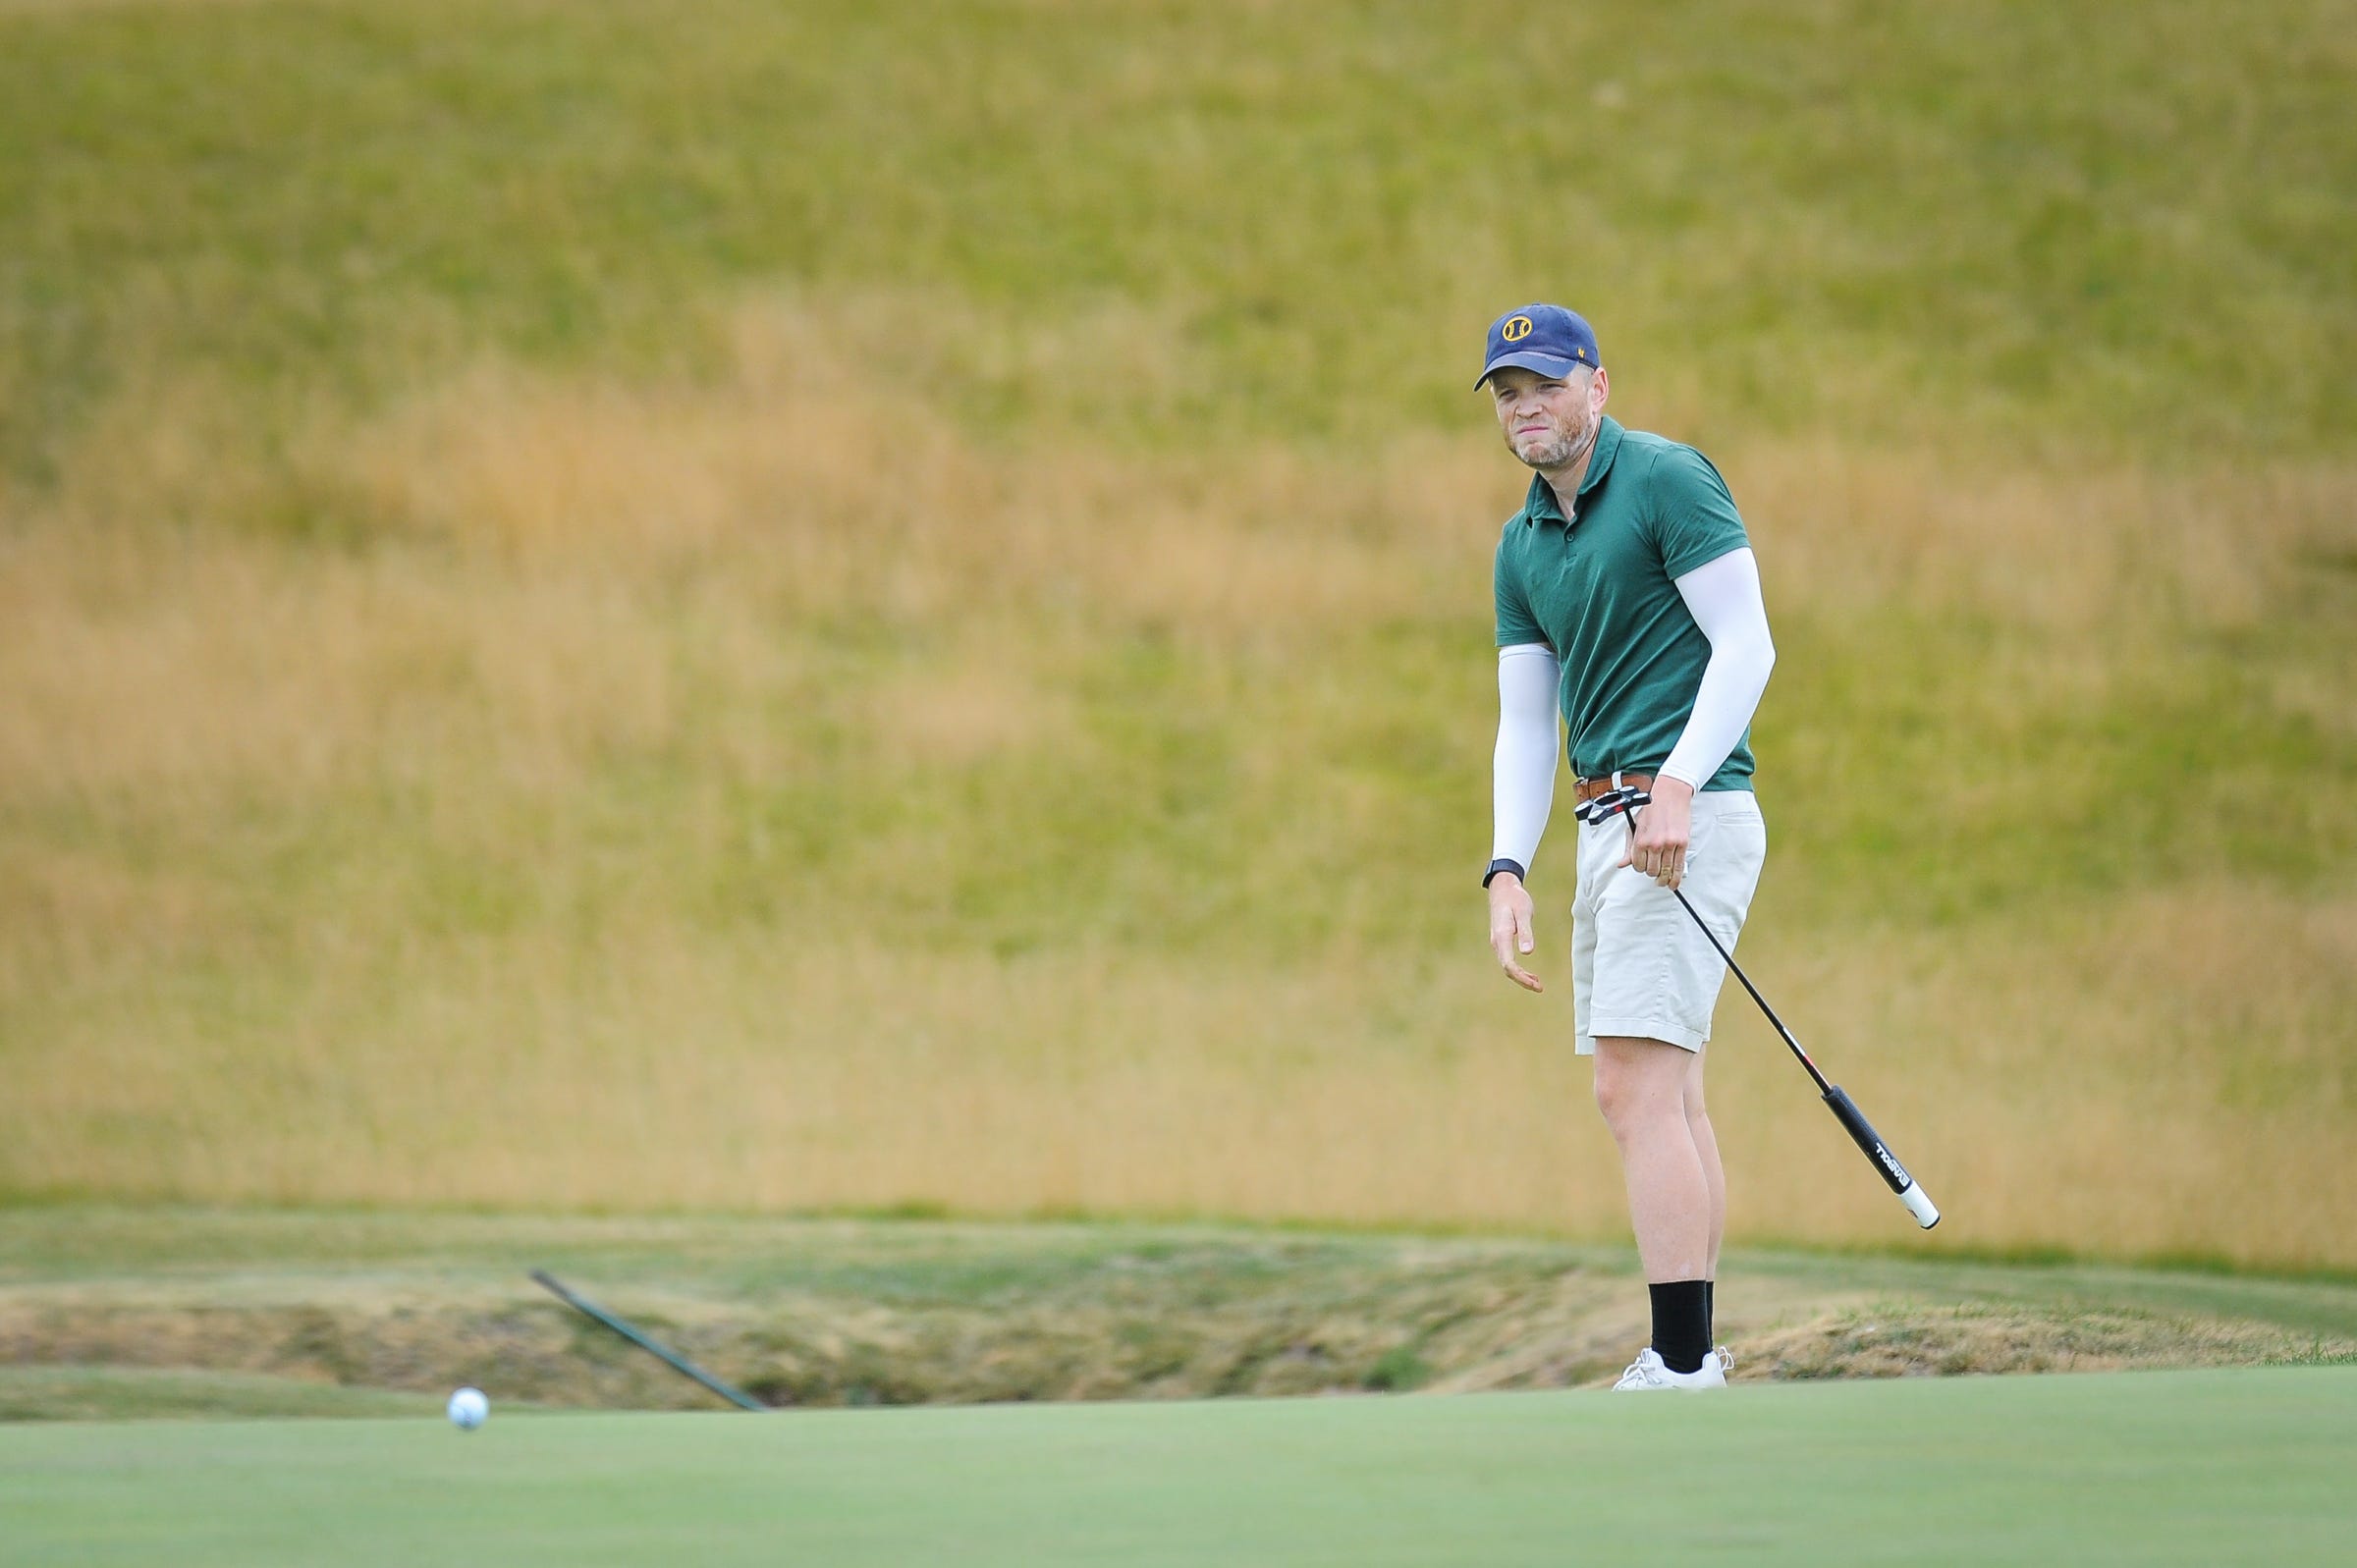 Six Wisconsin golfers will battle for U.S. Open spots through qualifying play June 3